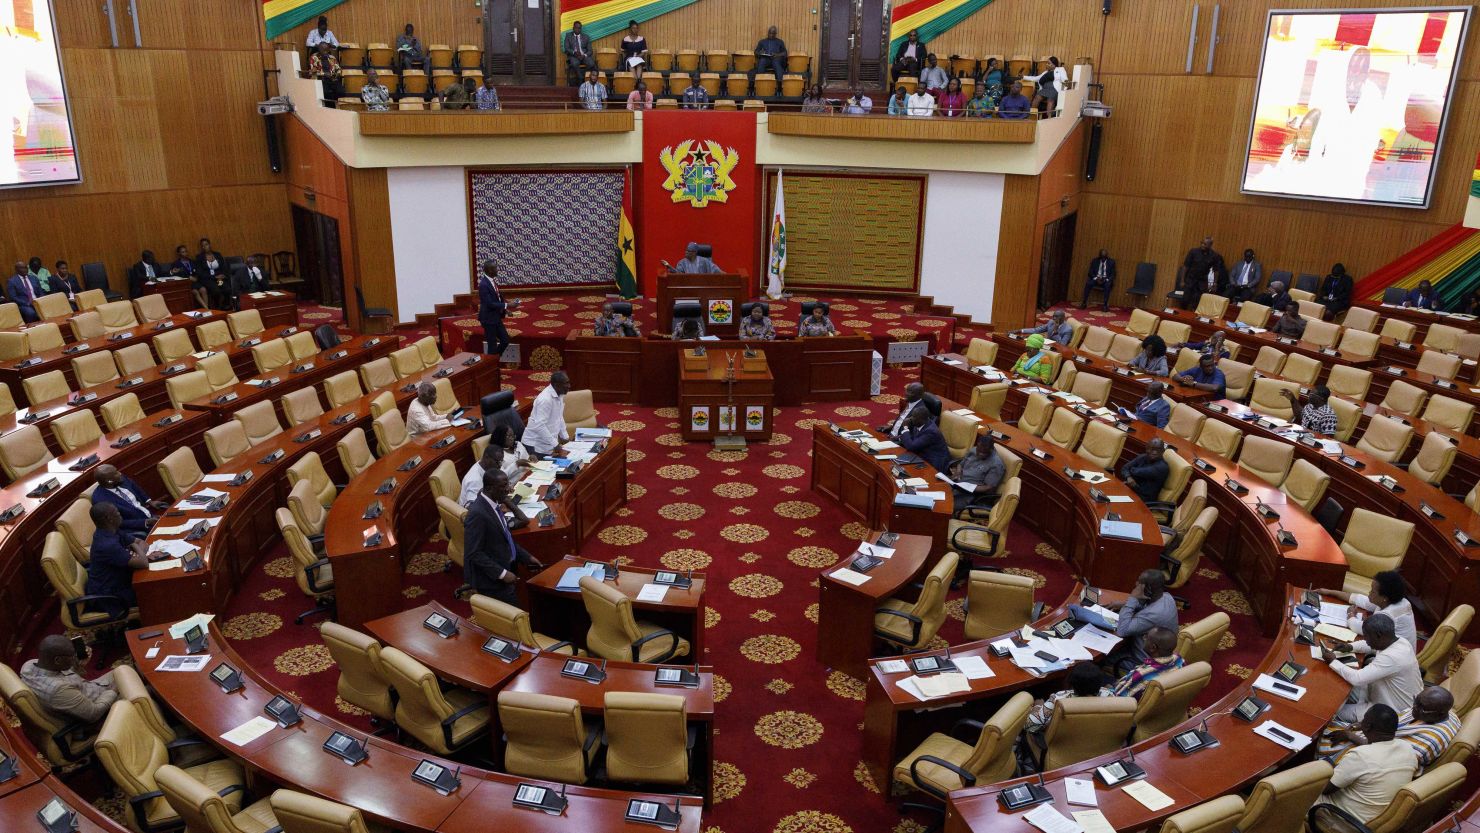 Ghana’s parliament unanimously passed a controversial anti-homosexuality bill last month that has drawn international condemnation.